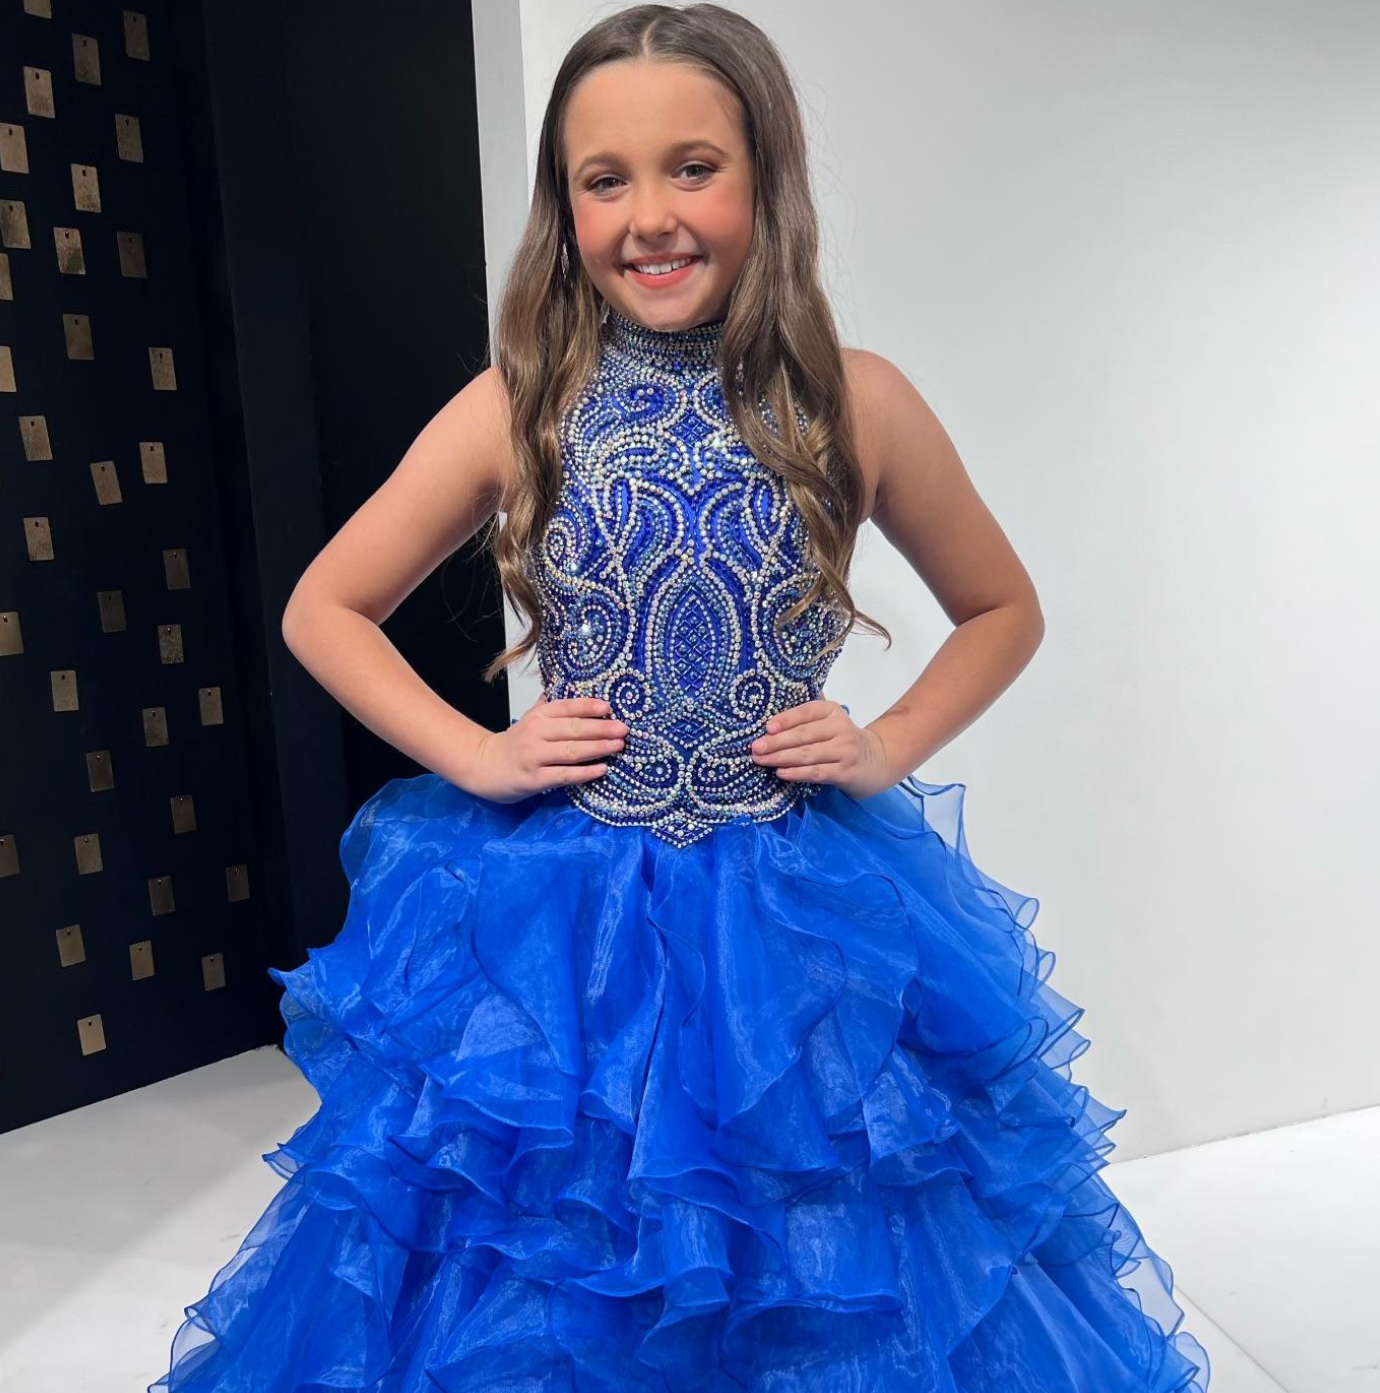 Sugar Kayne C326 is the perfect pageant dress for young girls and preteens, featuring a ruffled long skirt, high neckline, and crystal bodice with sleeveless design.  Colors:  Barbie Pink, Royal, White